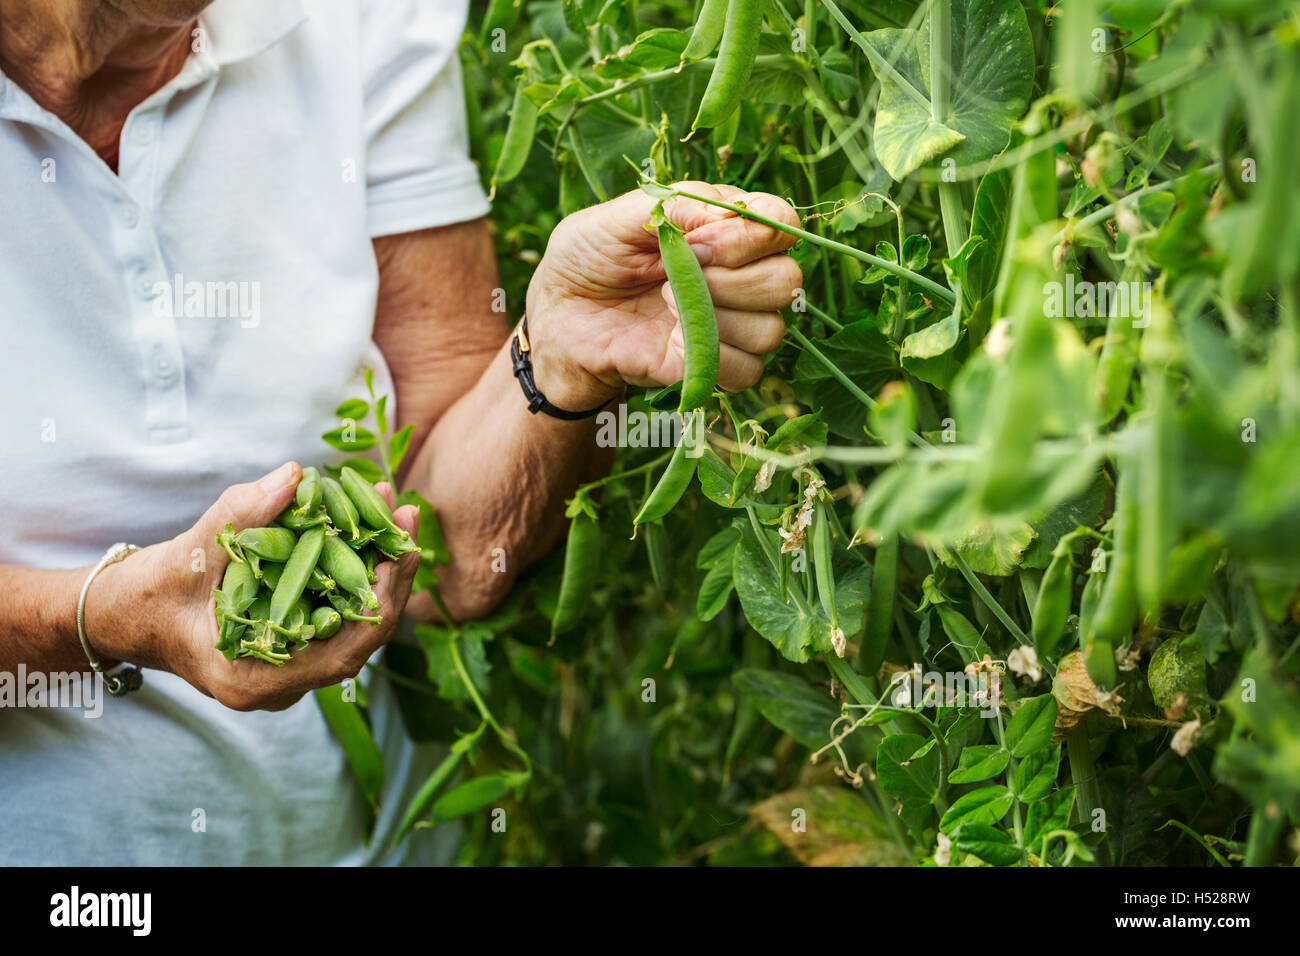 A woman picking pea pods from a green pea plant in a garden. Stock Photo